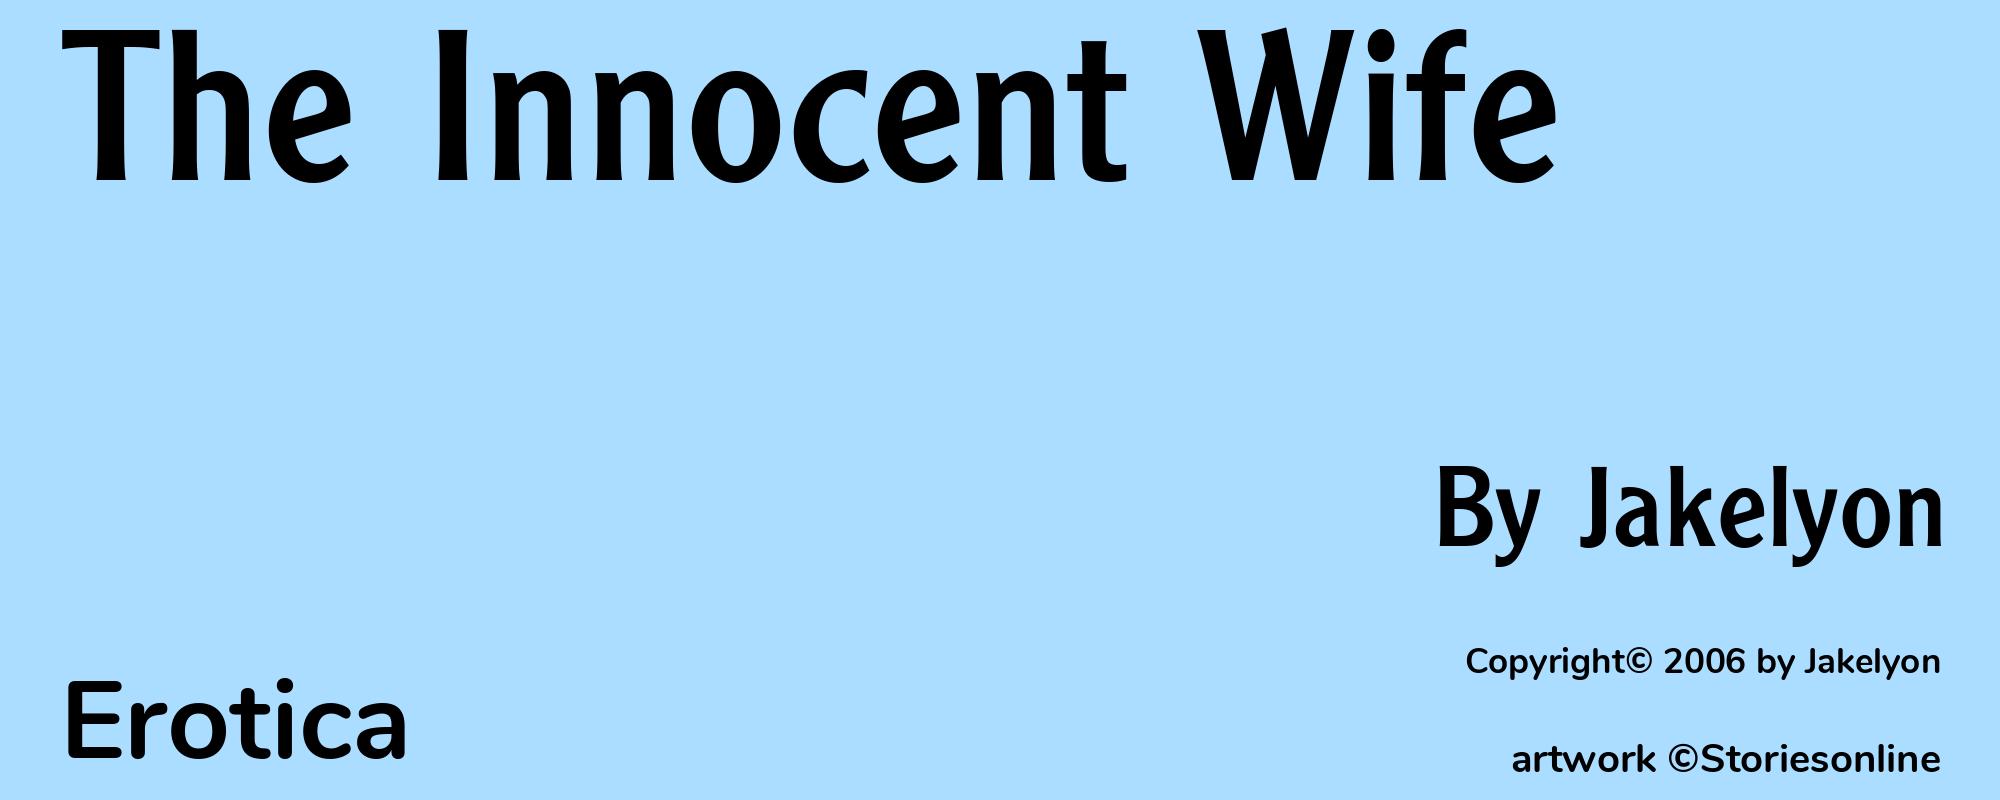 The Innocent Wife - Cover